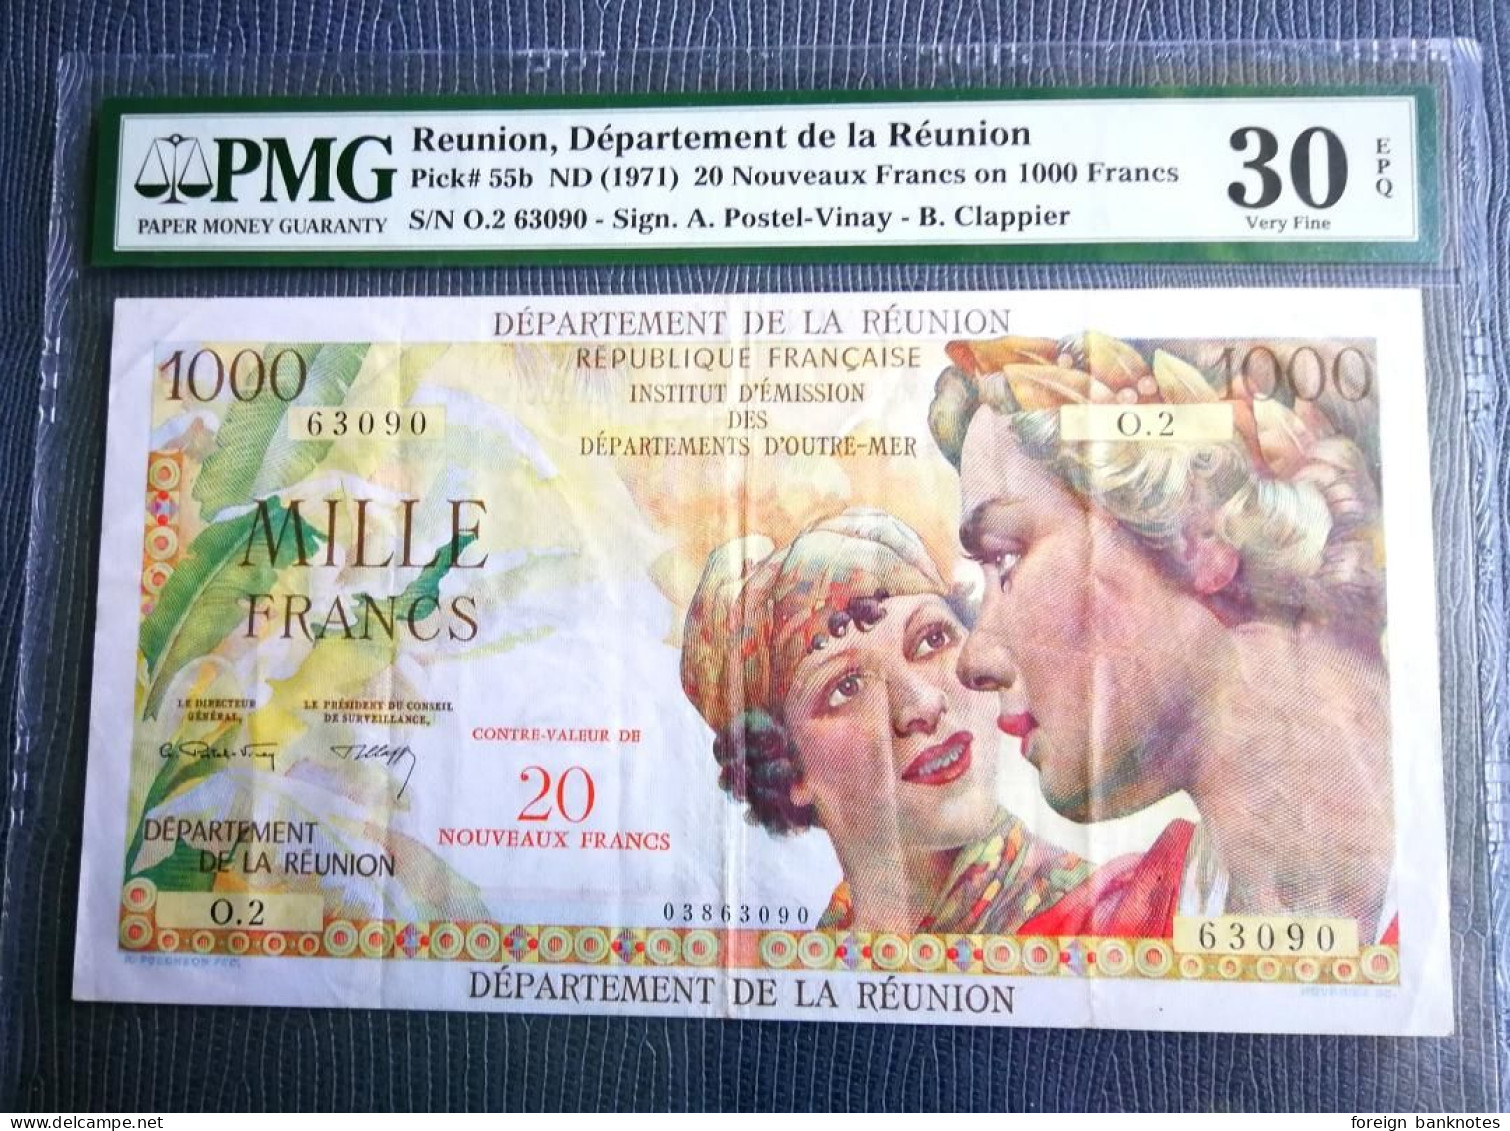 Exceptional Paper Quality PMG graded Reunion 20 New Francs on 1000 Francs 1971️ P-55